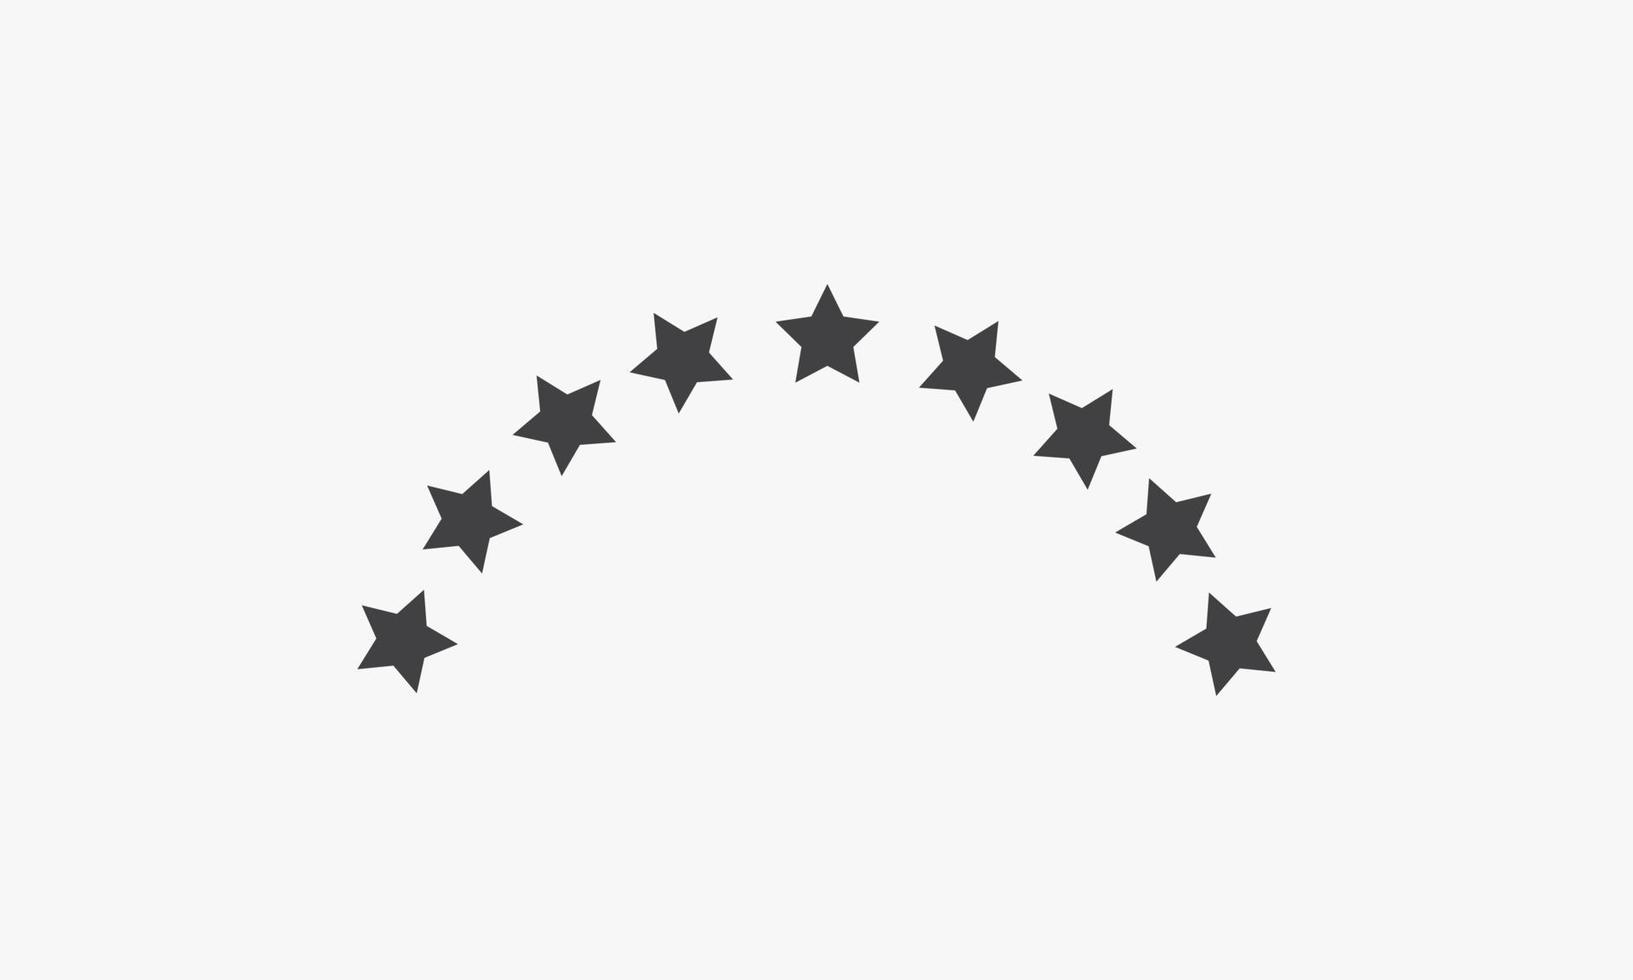 curved star icon. isolated on white background. vector illustration.